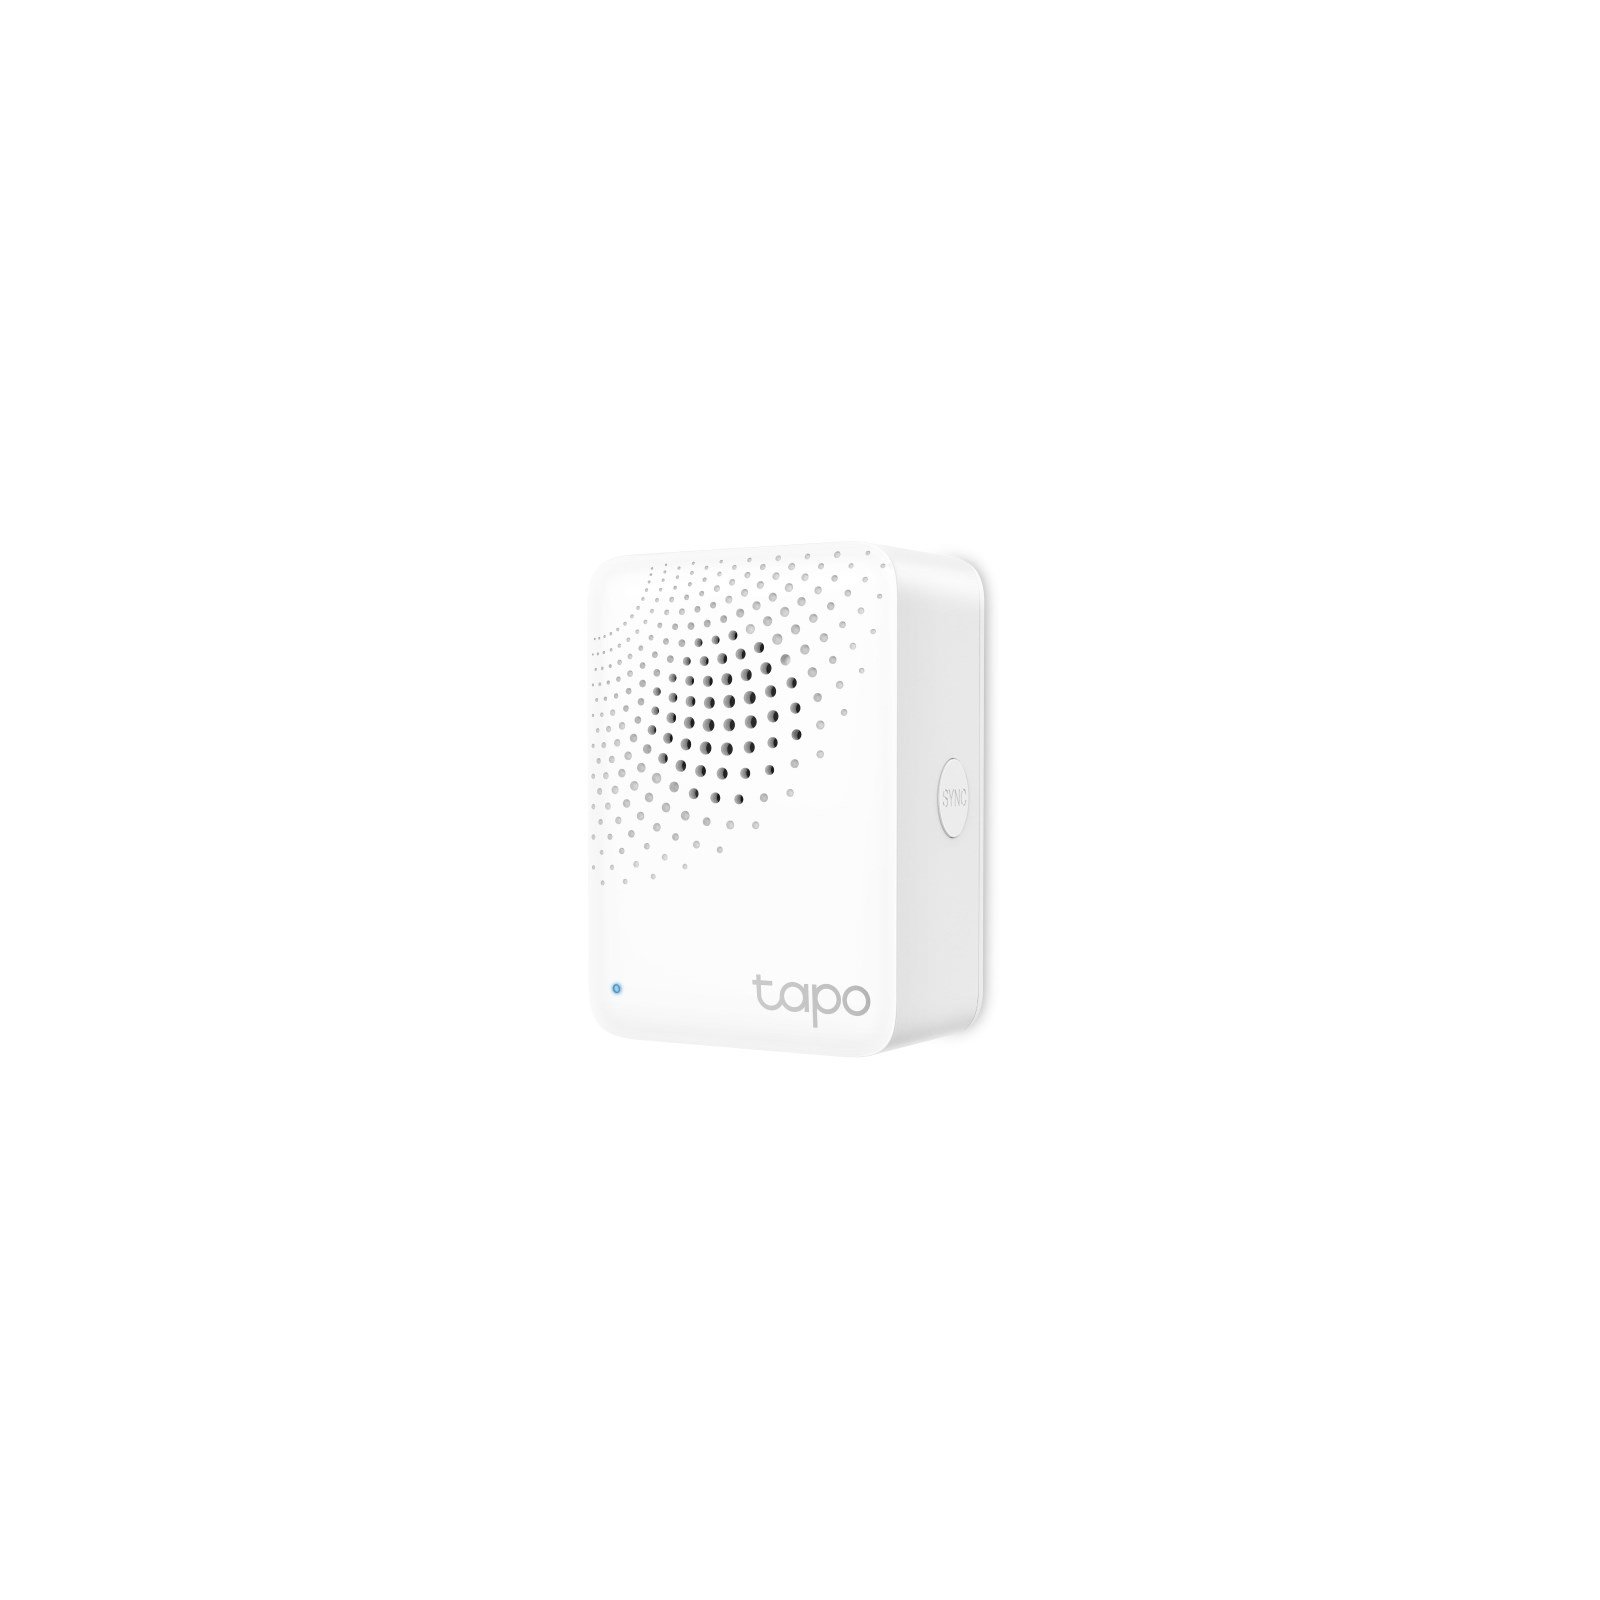 TP Link Tapo H100 Smart IoT Hub with Chime works with Tapo Smart